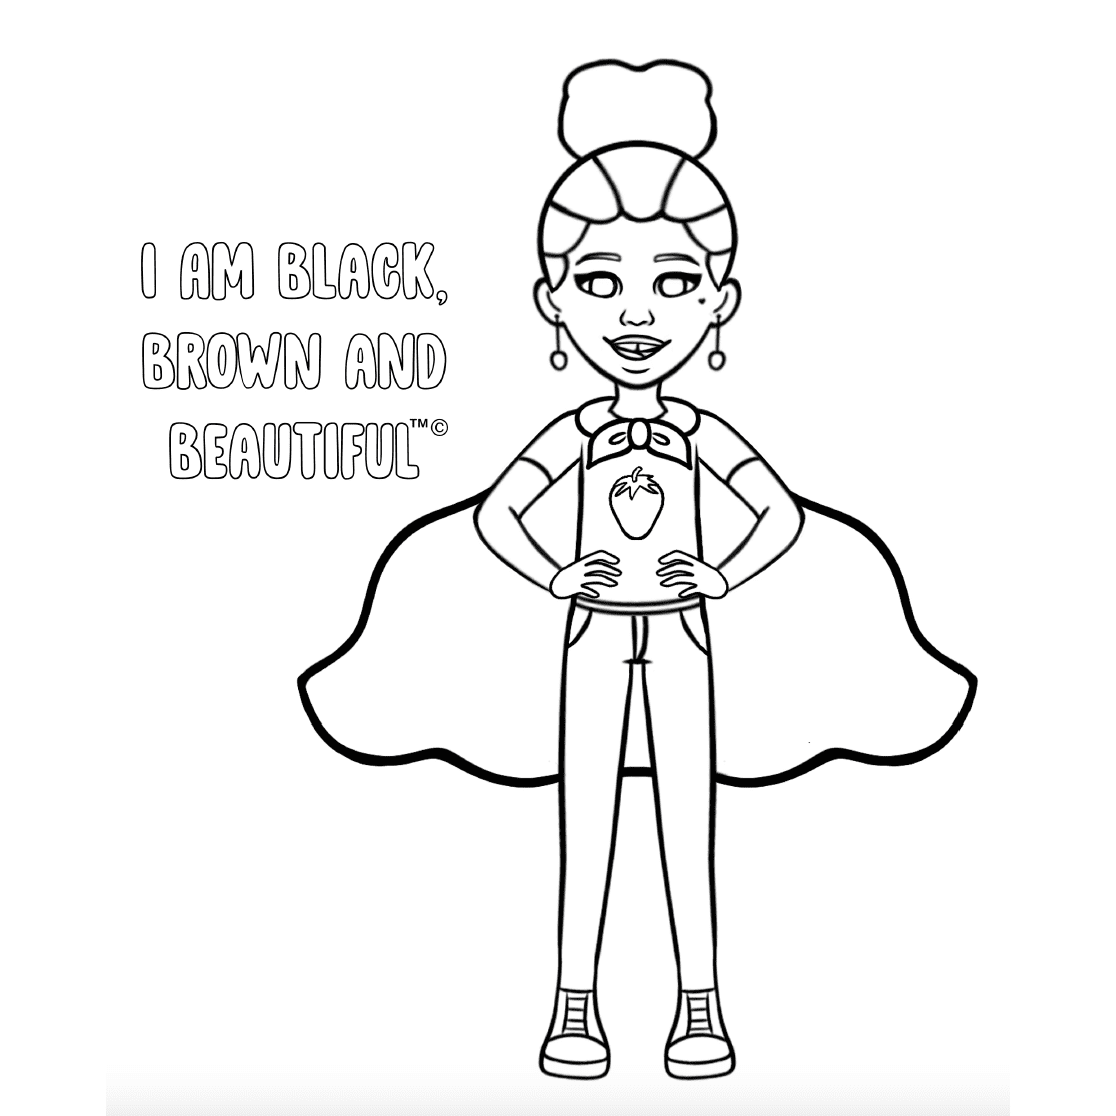 Coloring Page from Black, Brown and Beautiful Coloring Book: I AM BLACK, BROWN and BEAUTIFUL